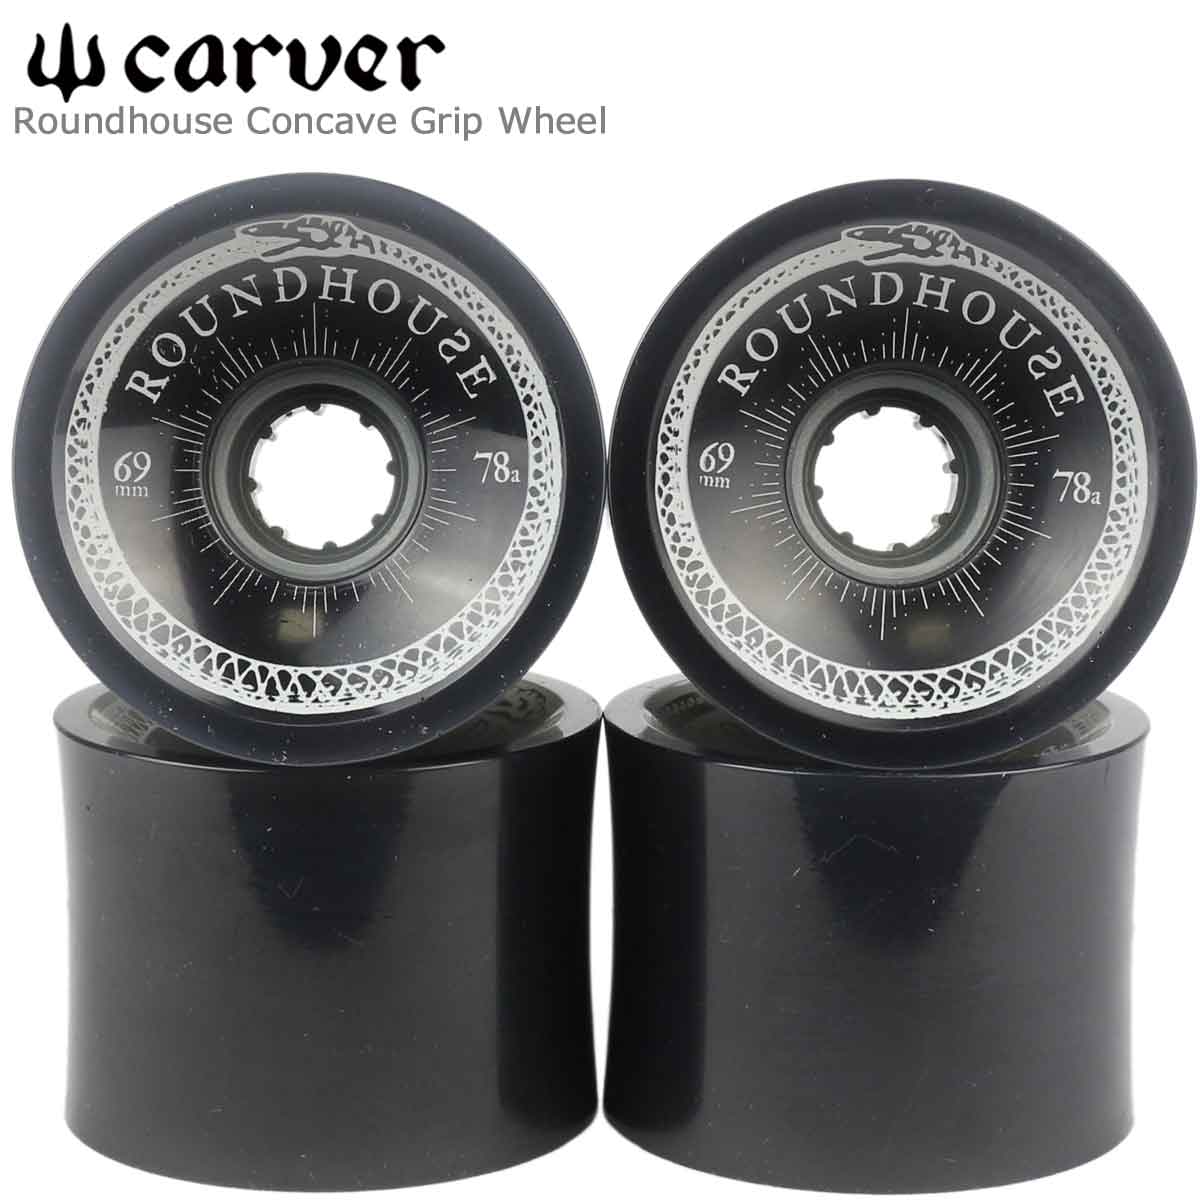 Carver Wheel カーバー 純正ウィール 4個セットRoundhouse By ...